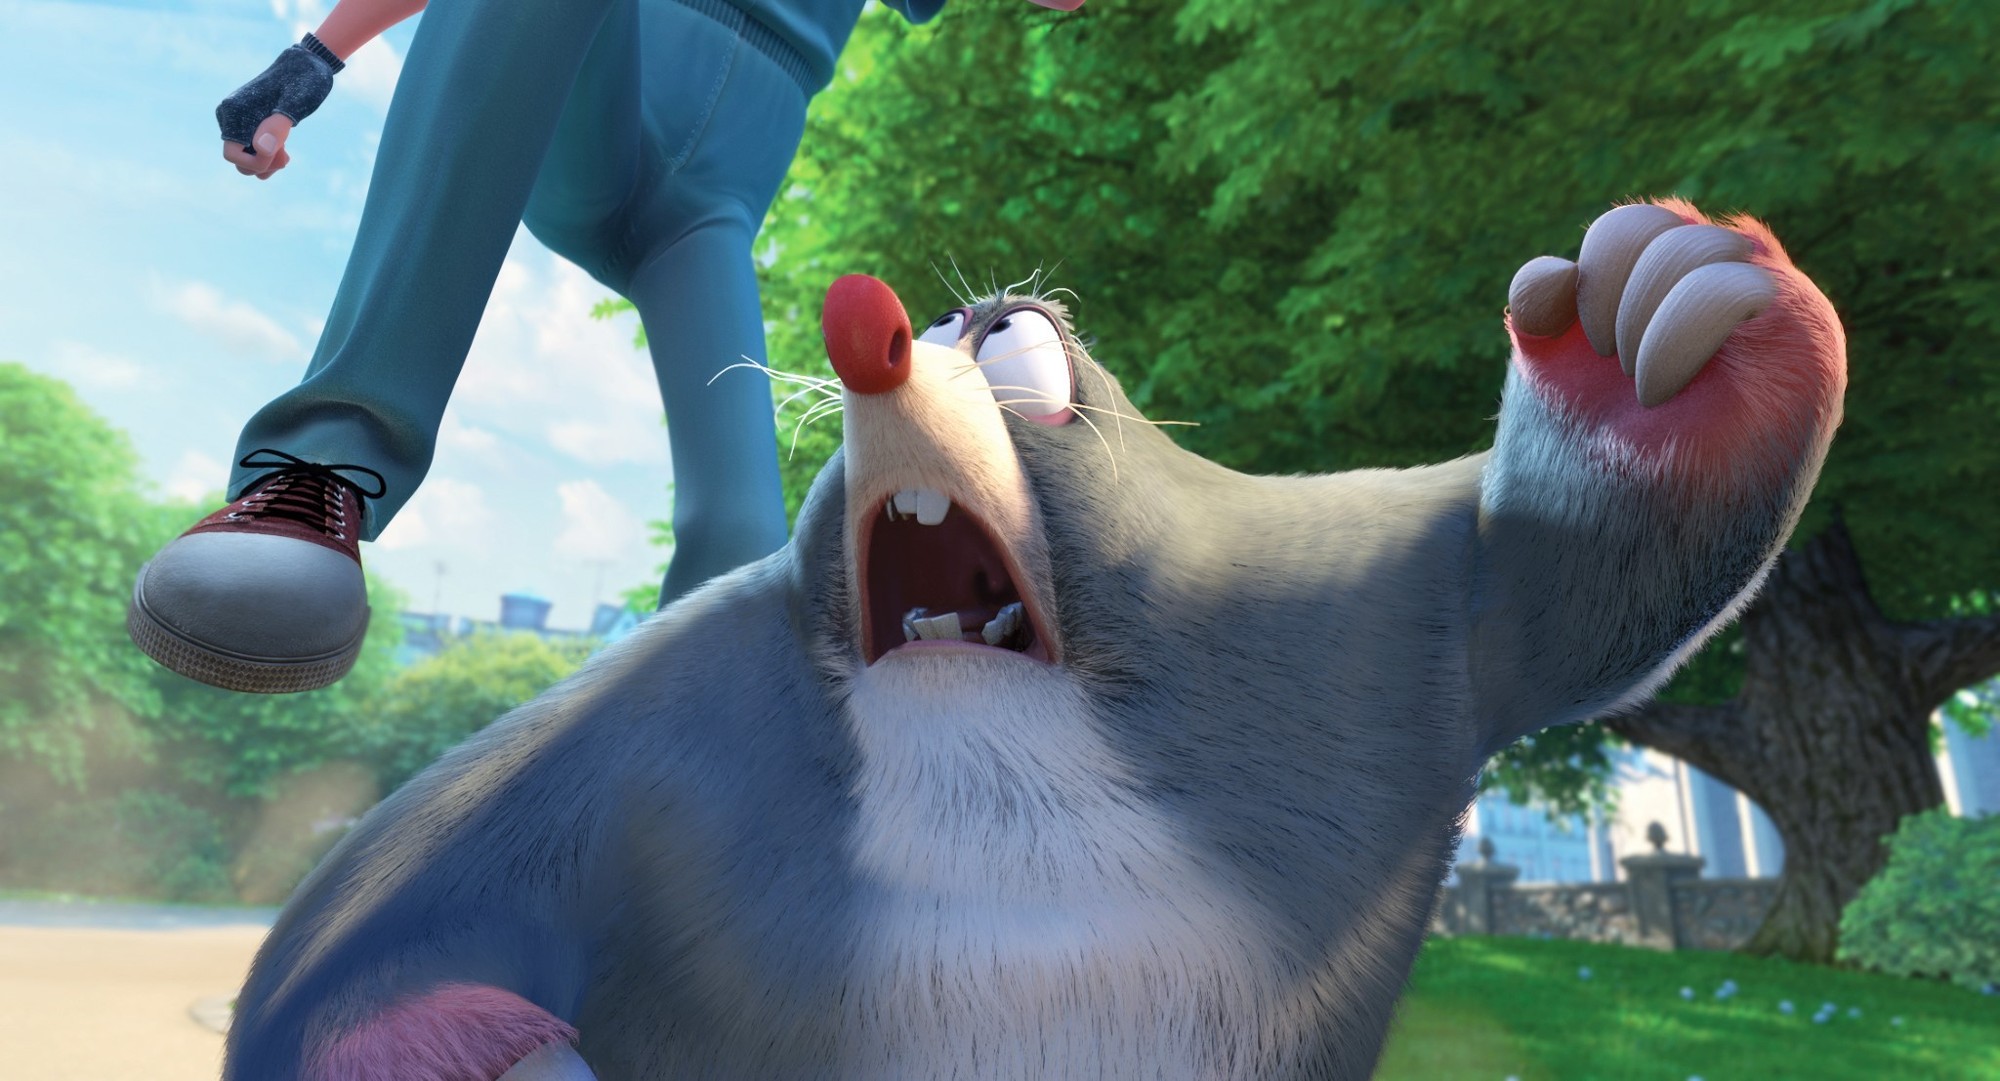 Mole from Open Road Films' The Nut Job 2: Nutty by Nature (2017)